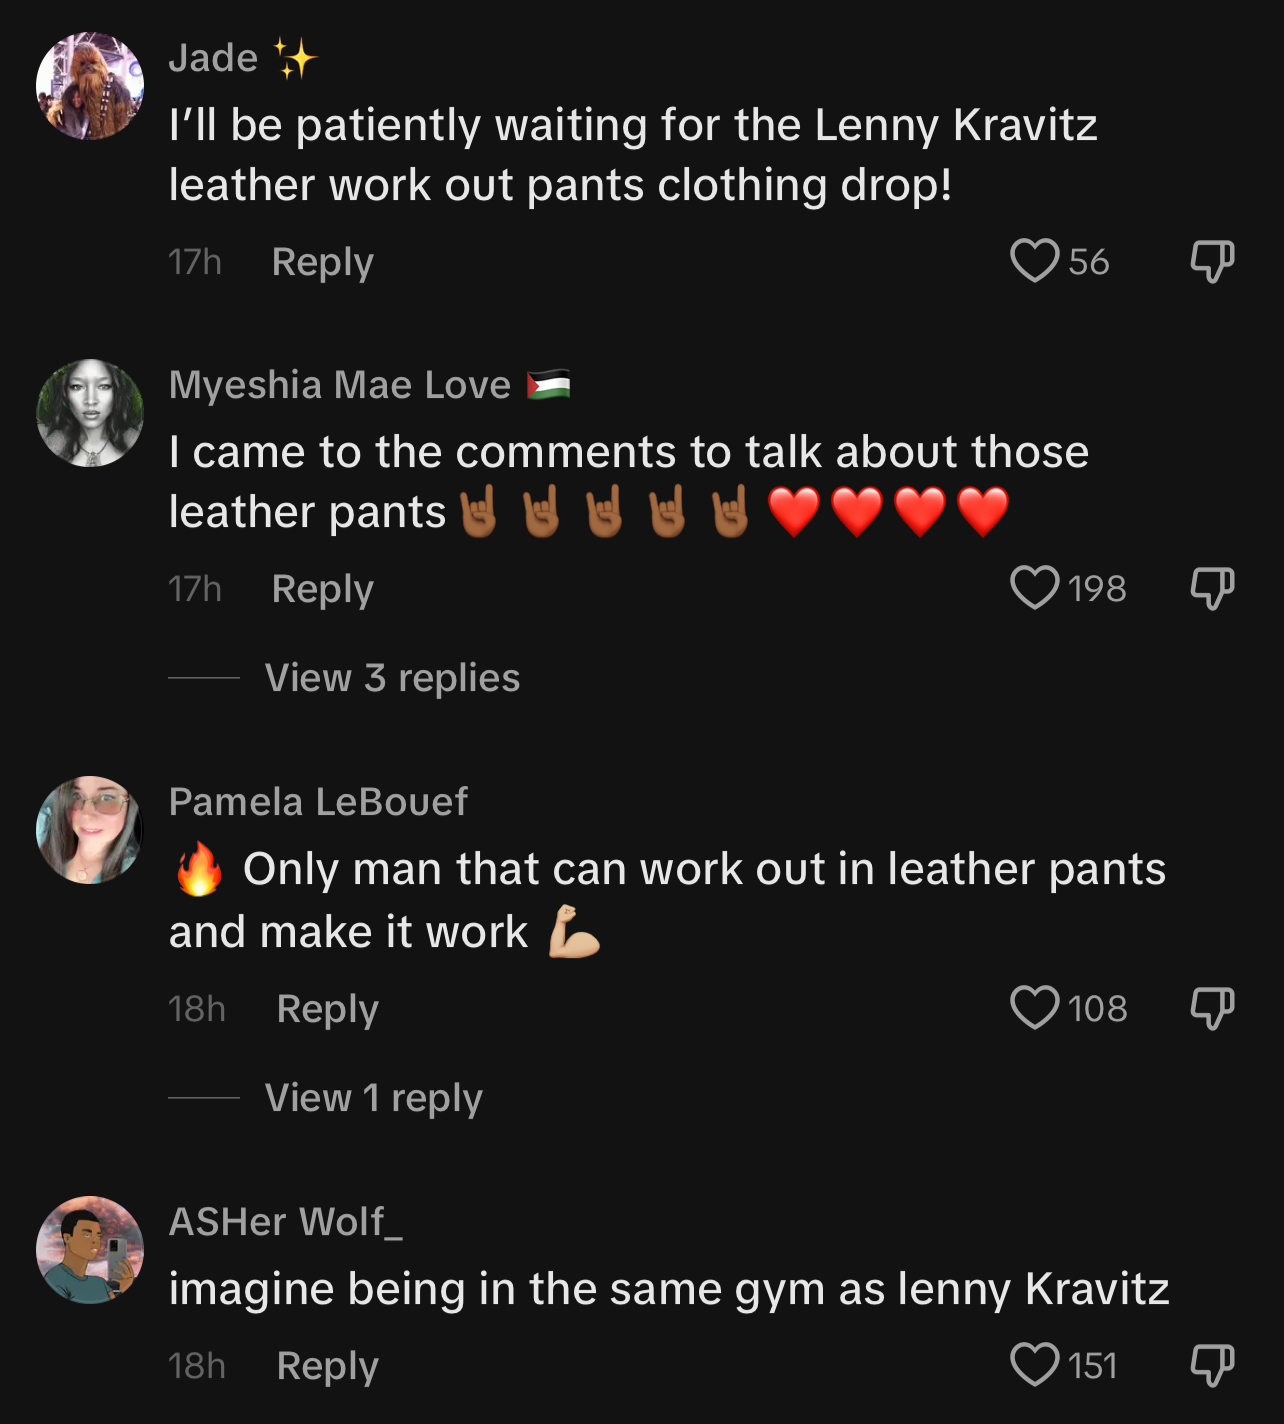 Four comments under a social media post, users discussing Lenny Kravitz and joking about working out and wearing leather pants